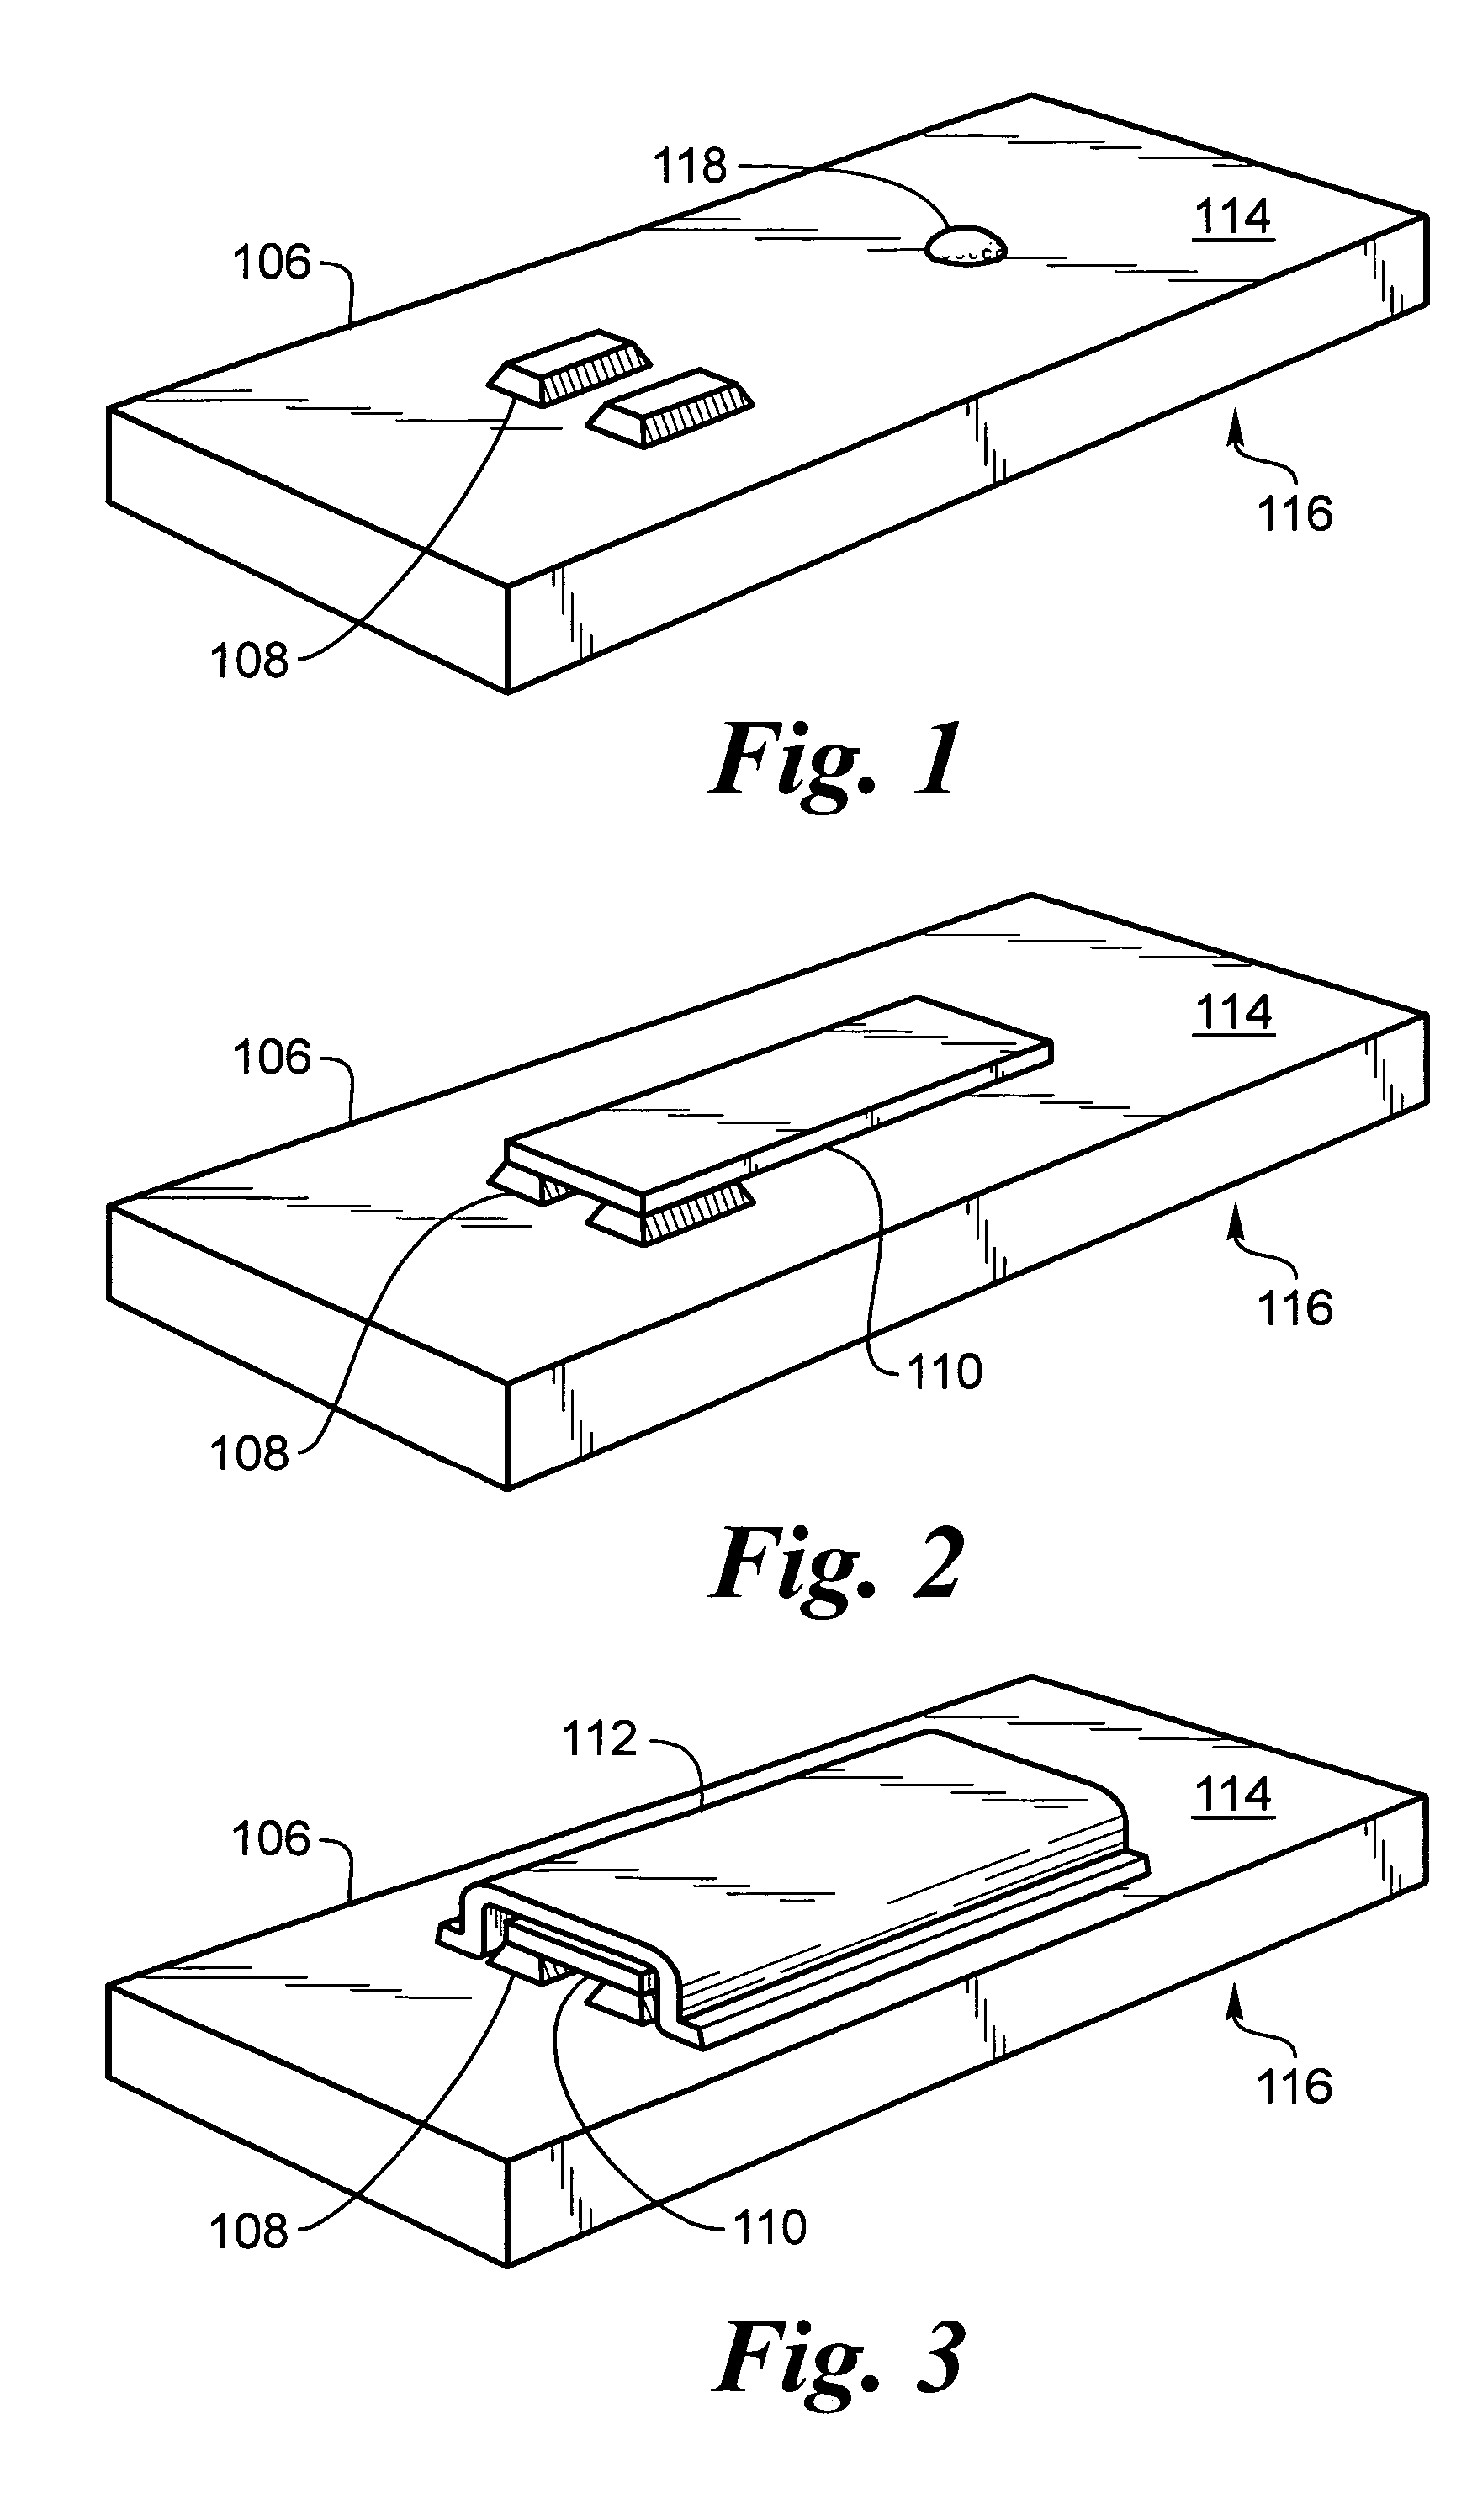 Piezoelectric device mounted on integrated circuit chip